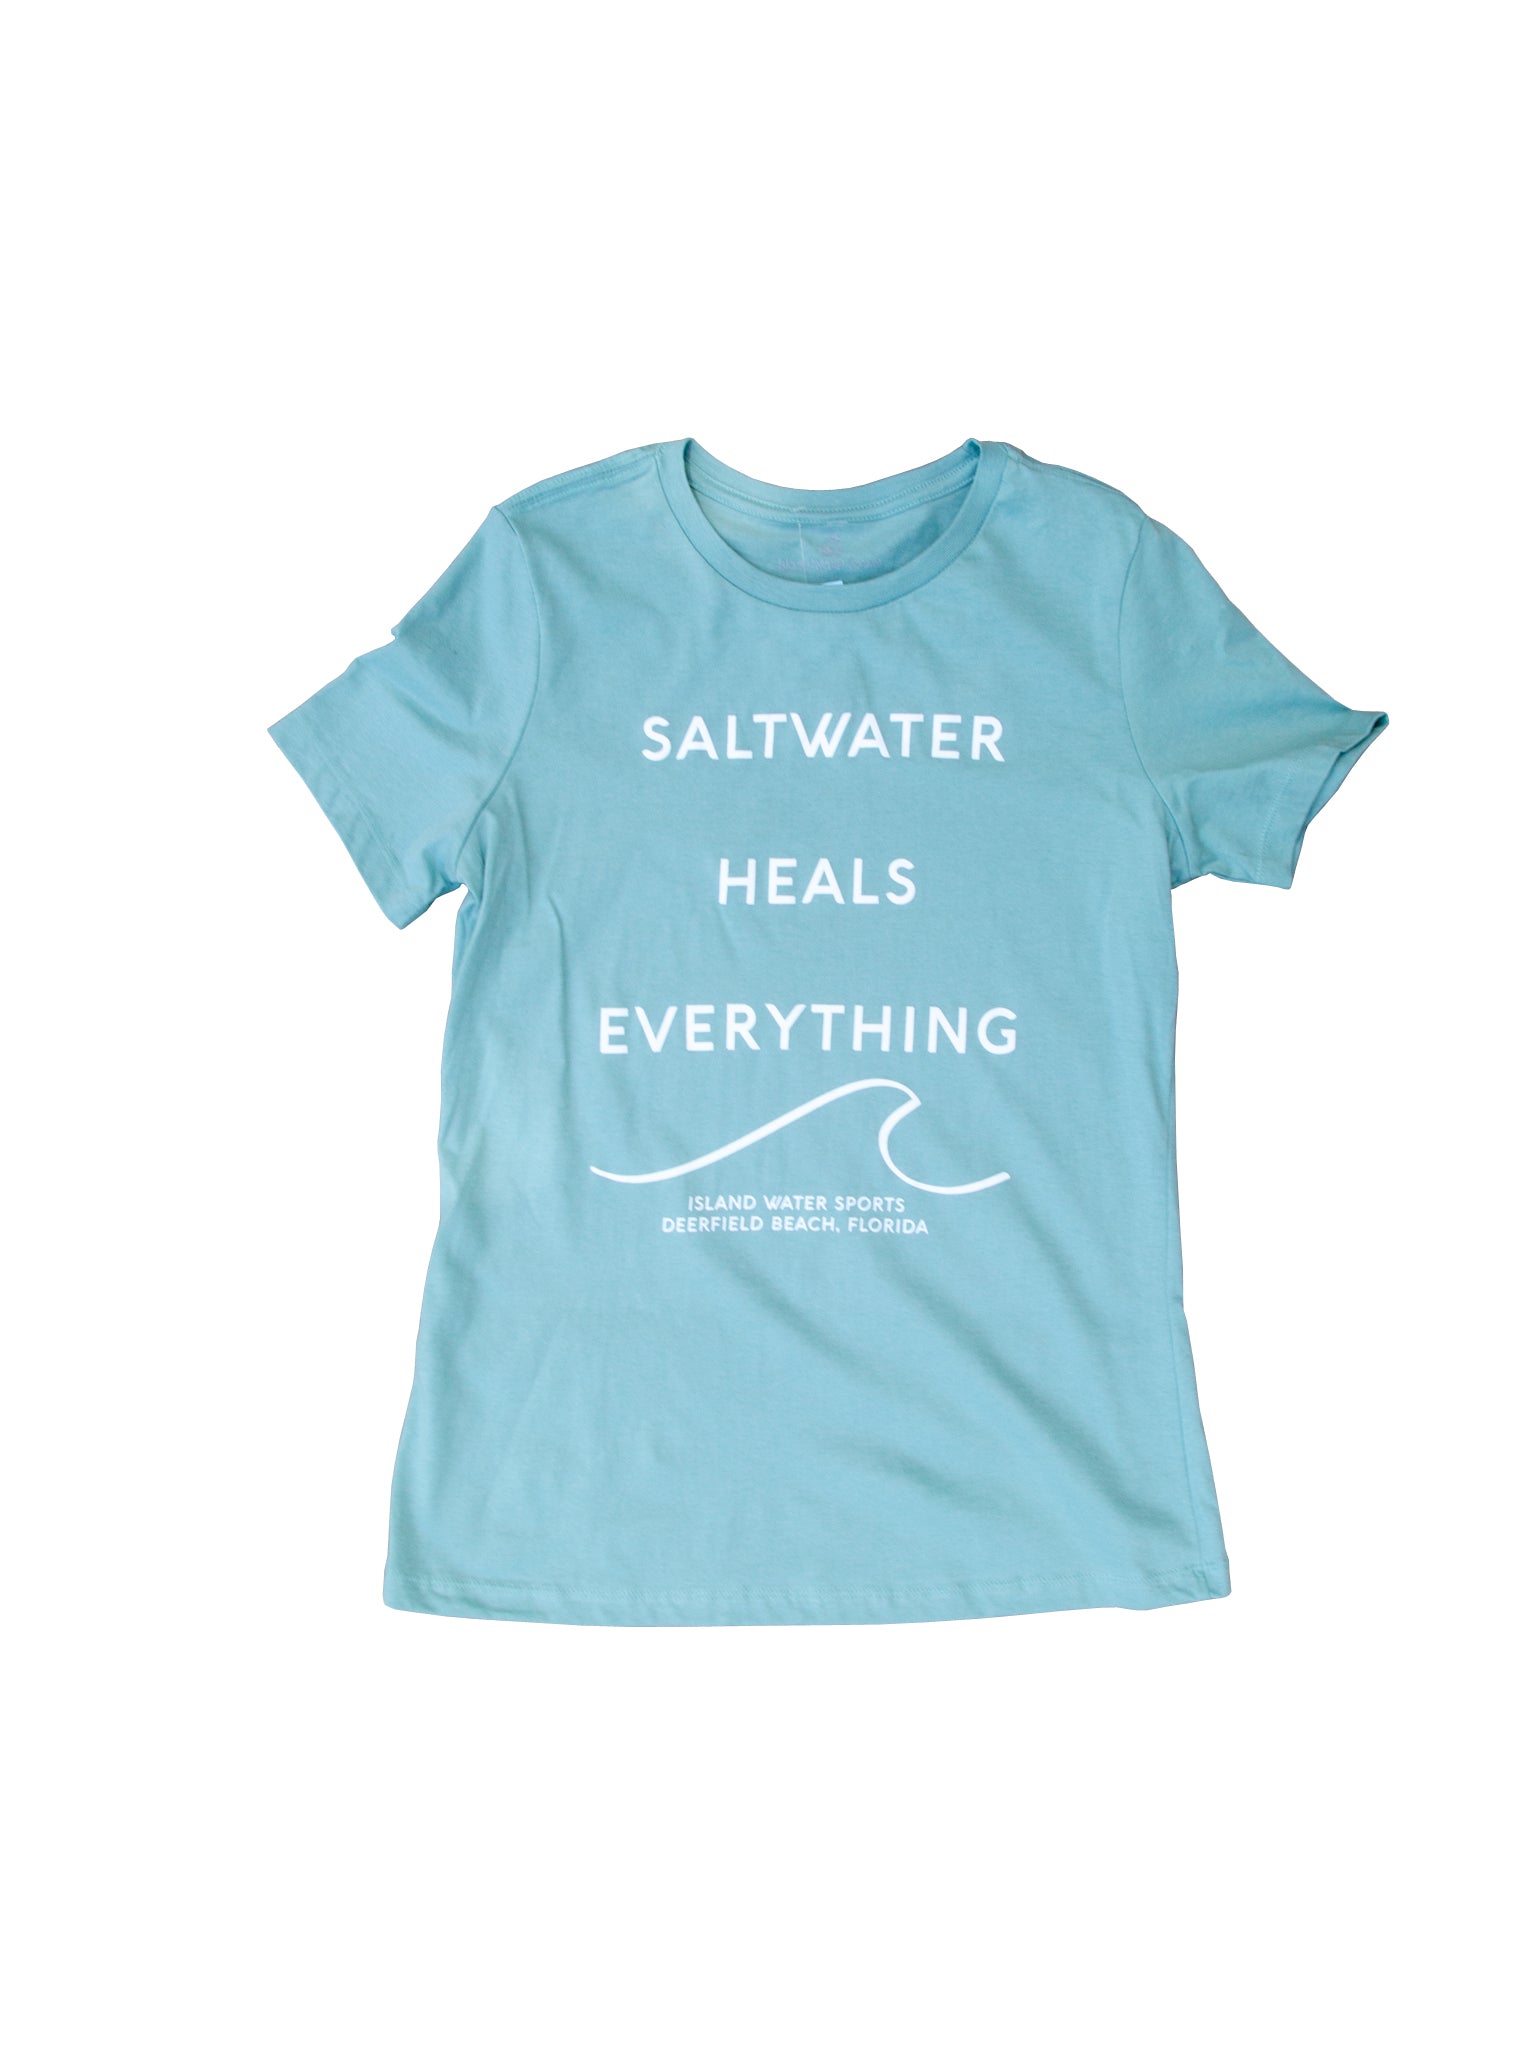 IWS Saltwater Heals Everything Relaxed S/S Tee DustyBlue-White XL